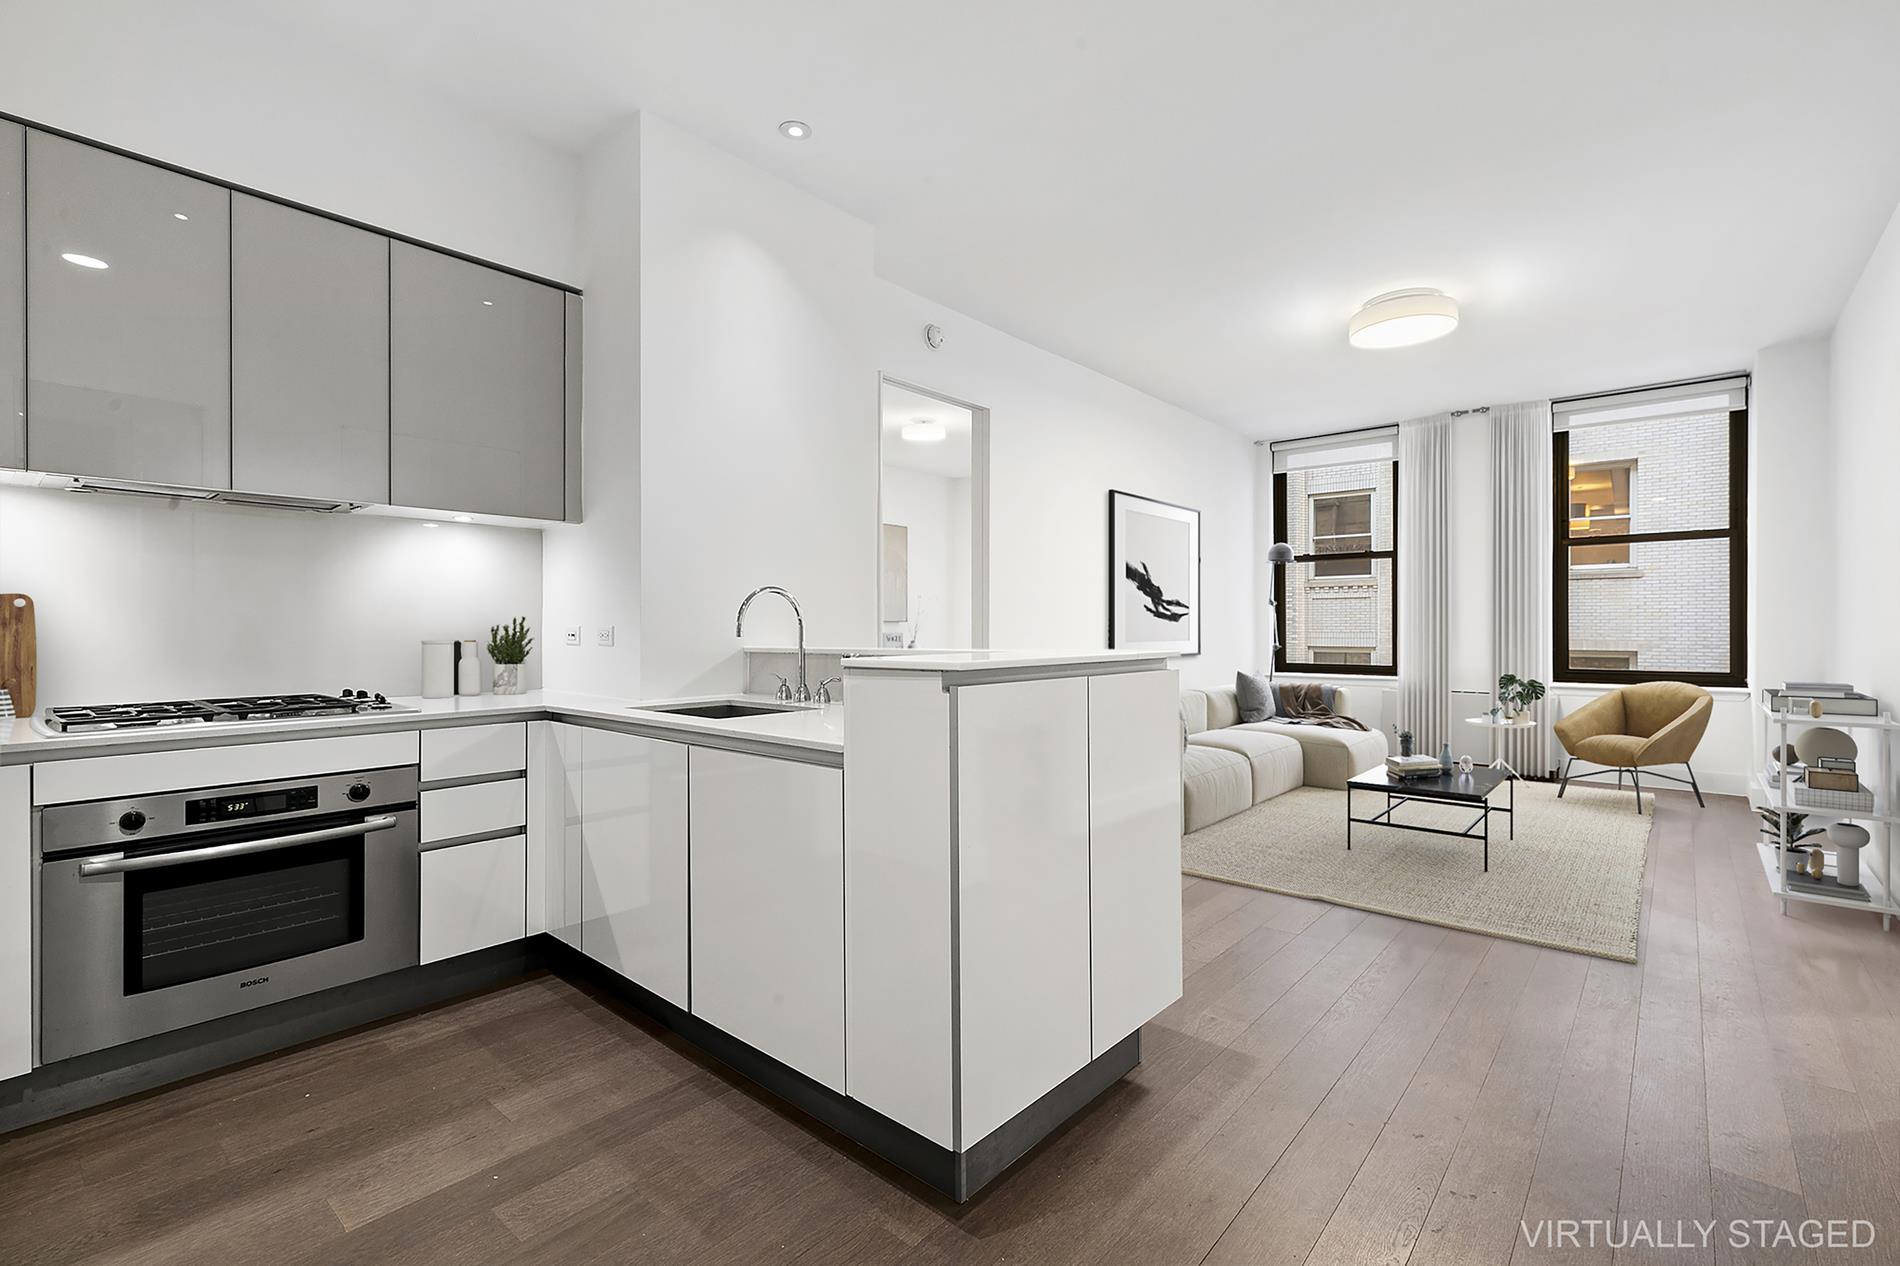 25 Broad Street 9-J, Financial District, Downtown, NYC - 2 Bedrooms  
2 Bathrooms  
3 Rooms - 